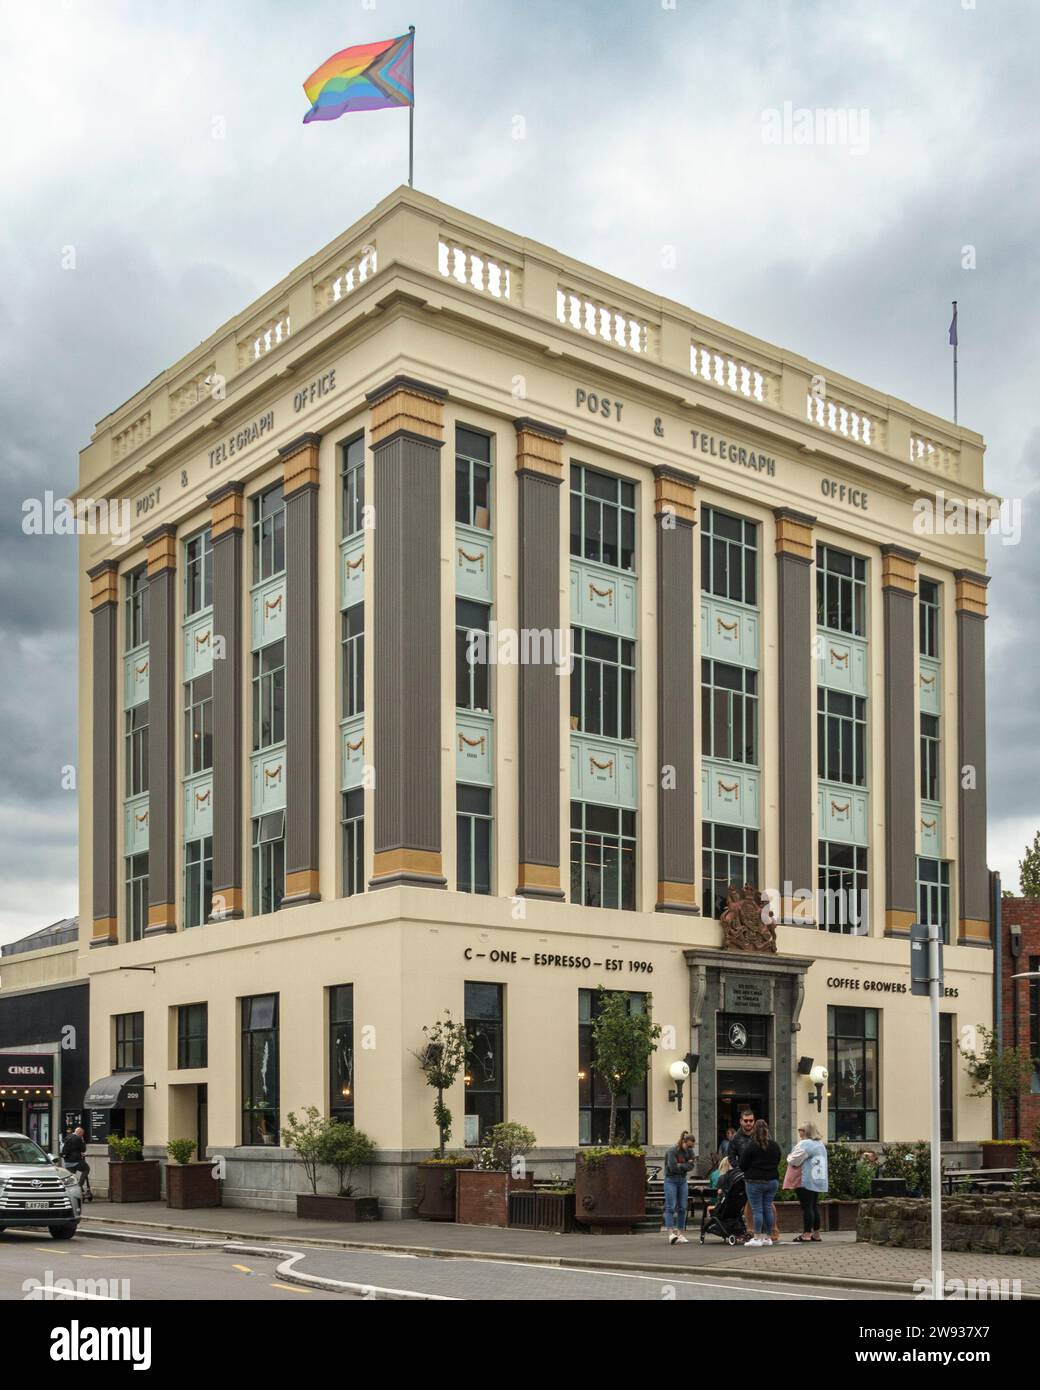 This old post office and telegraph office building is now a cafe. Stock Photo